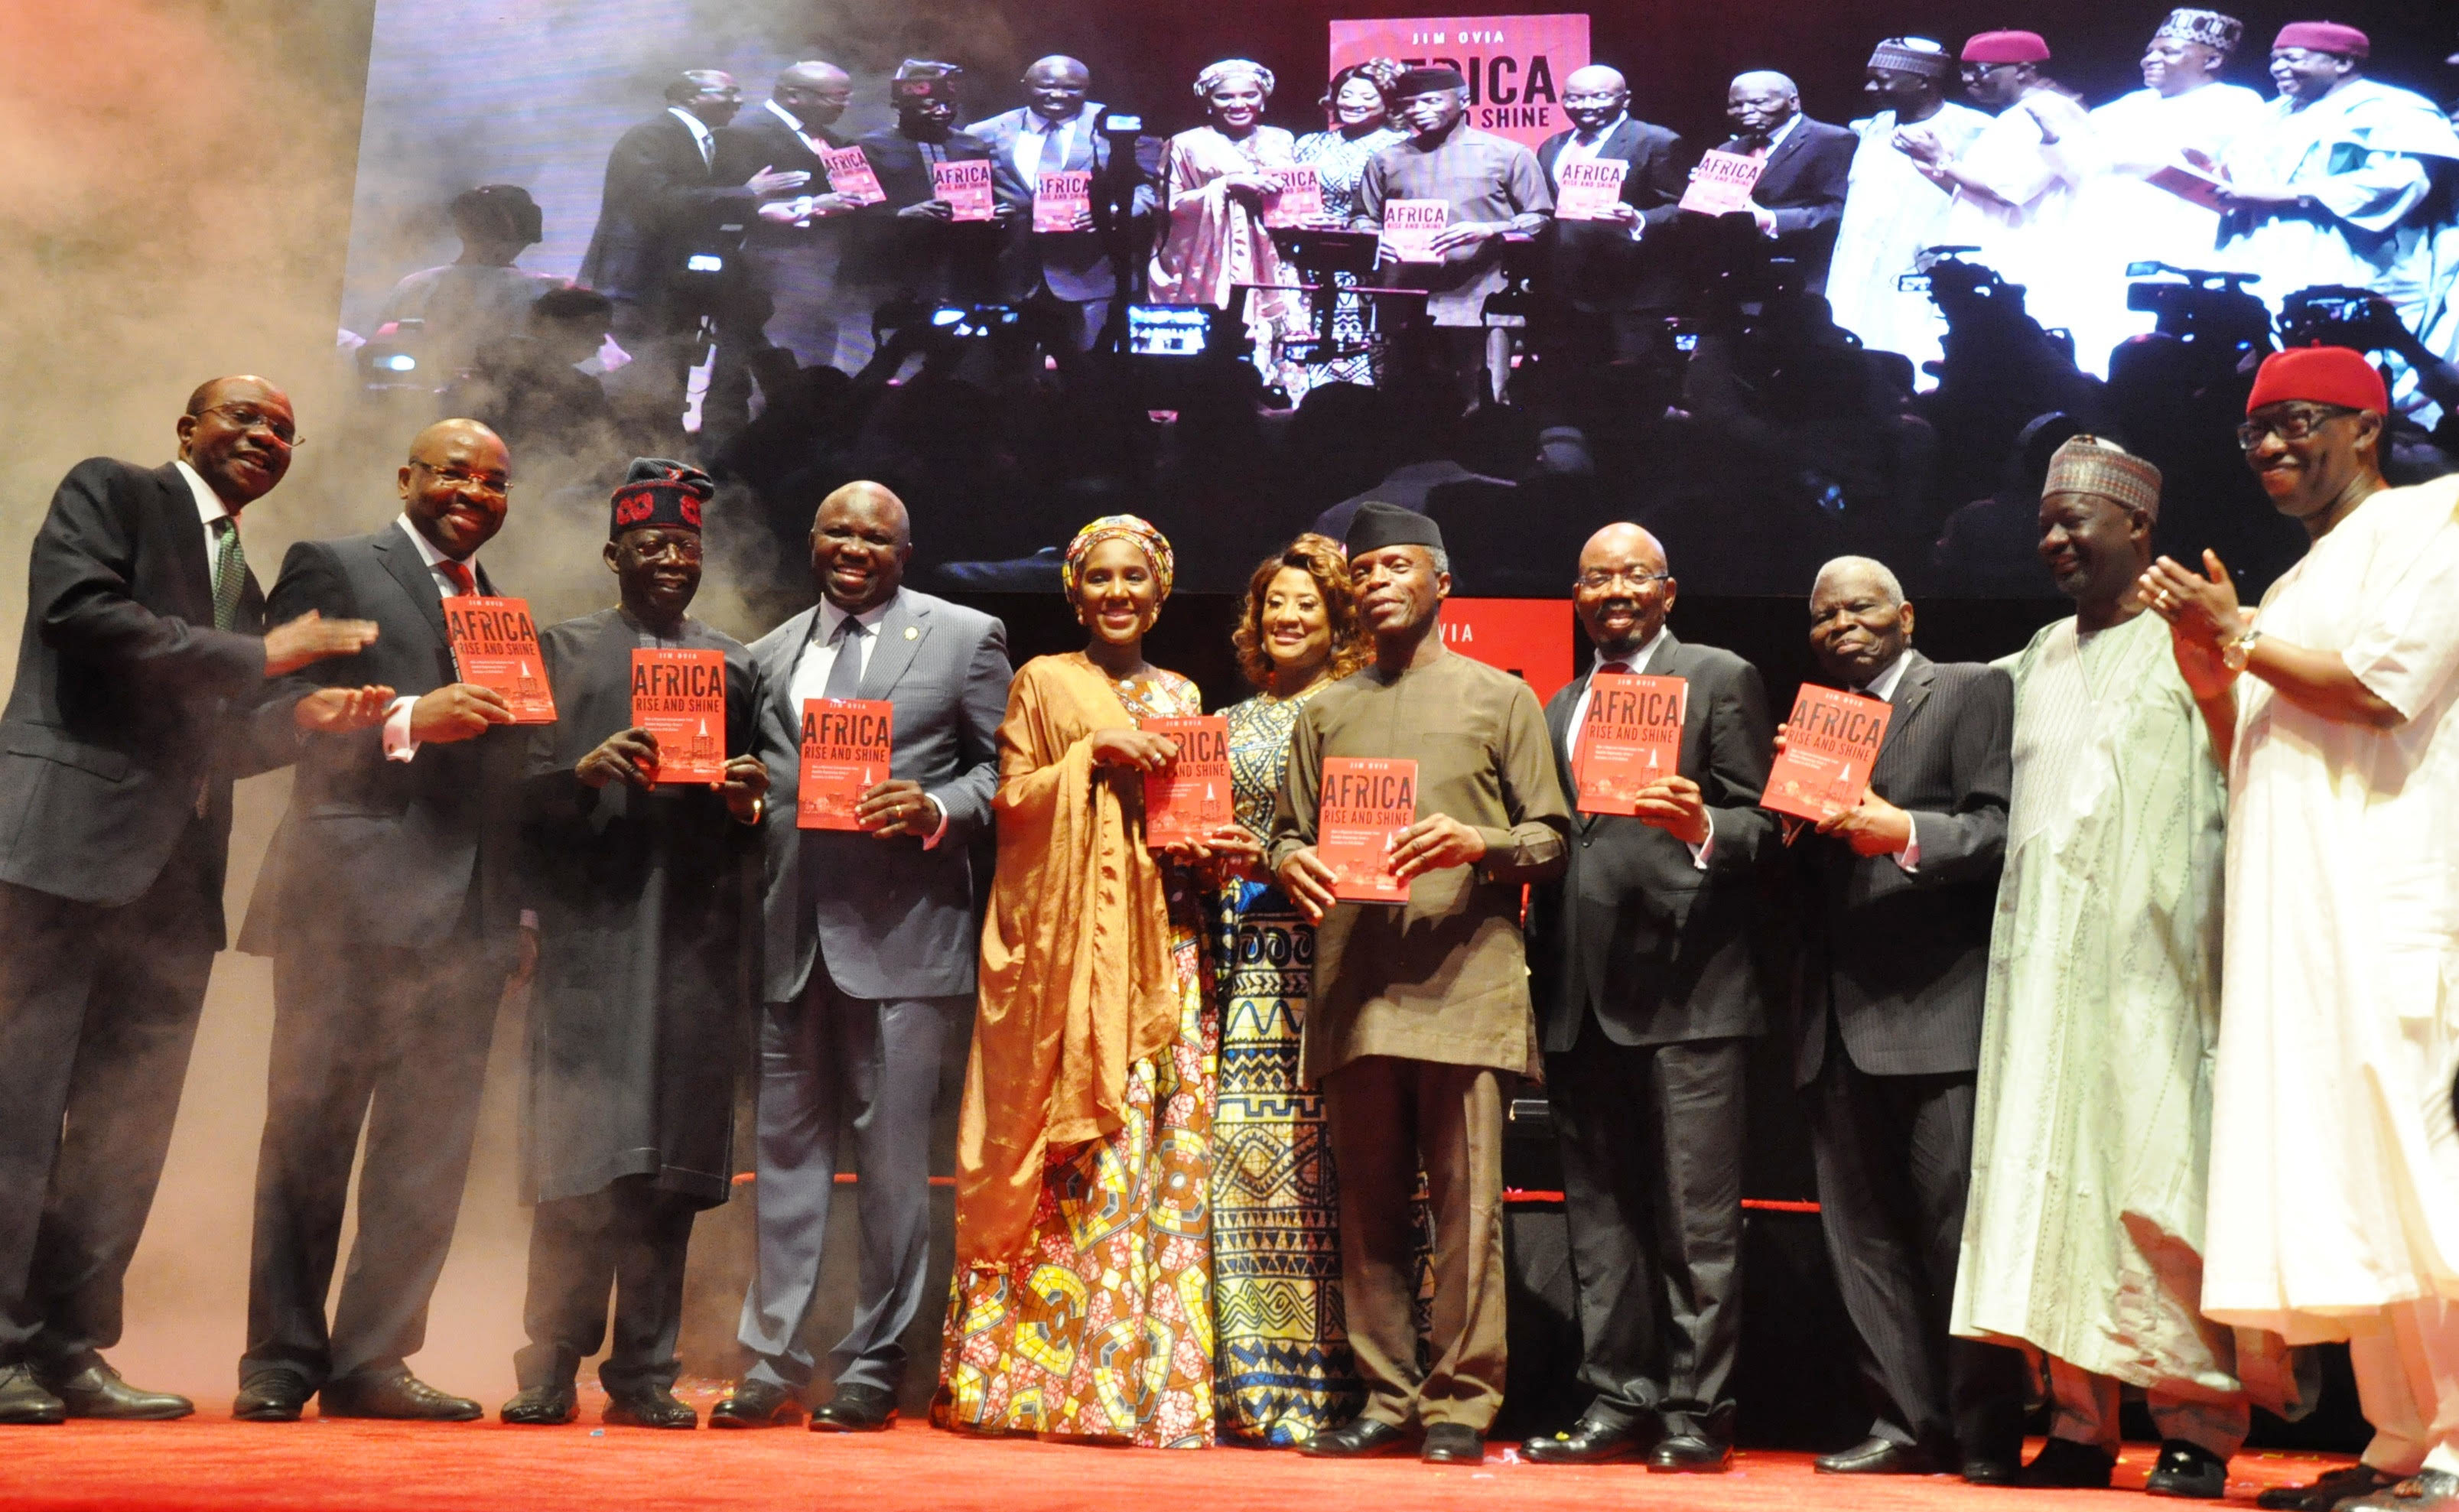 PHOTOS OF THE DAY: Faces at Jim Ovia ’s autobiography, 'Africa Rise And Shine’